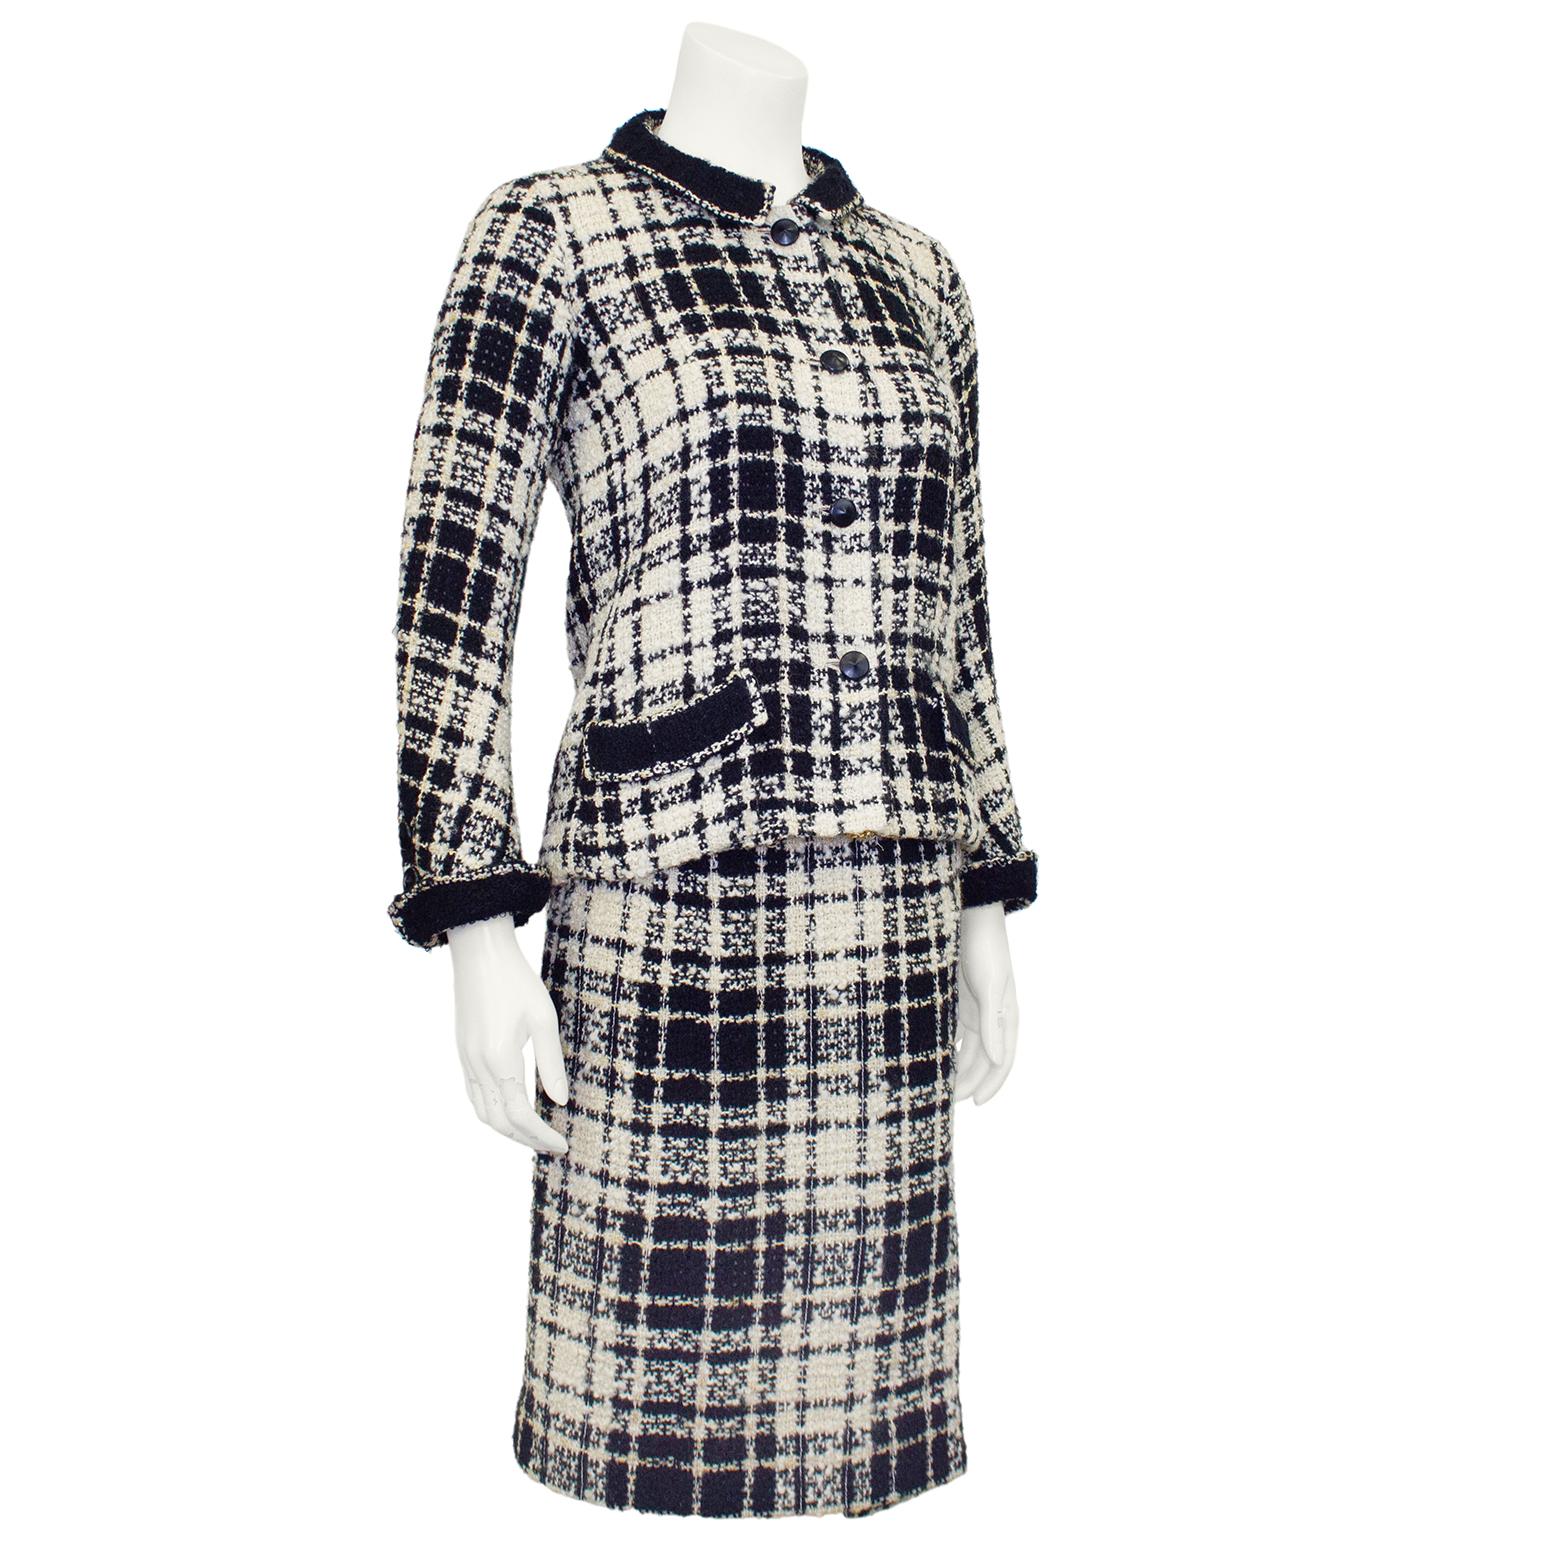 Stunning Chanel Haute Couture black, cream and gold plaid tweed jacket and dress ensemble from the 1960s. The jackets features a Peter Pan collar with pointed black resin buttons, folded slit pockets at the hips and turned cuffs that are tacked in